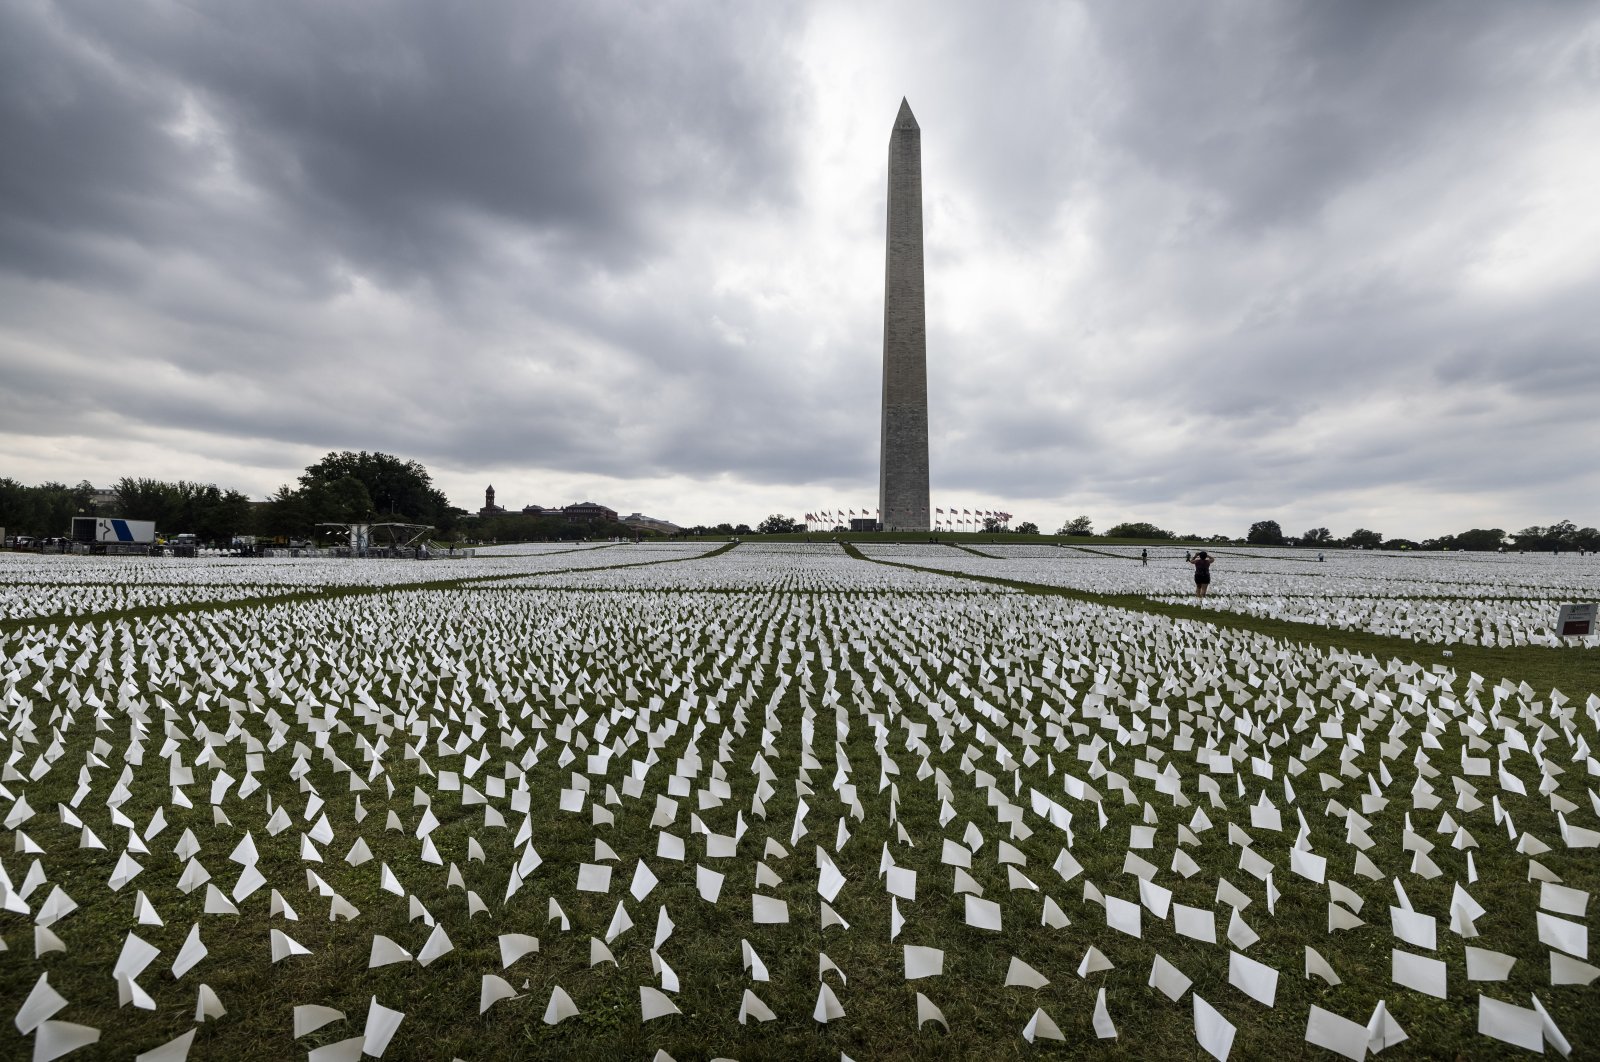 More than 660,000 white flags carpet the National Mall to commemorate the American lives lost to COVID-19 in Washington, D.C., U.S., Sept. 16, 2021. (EPA-EFE)